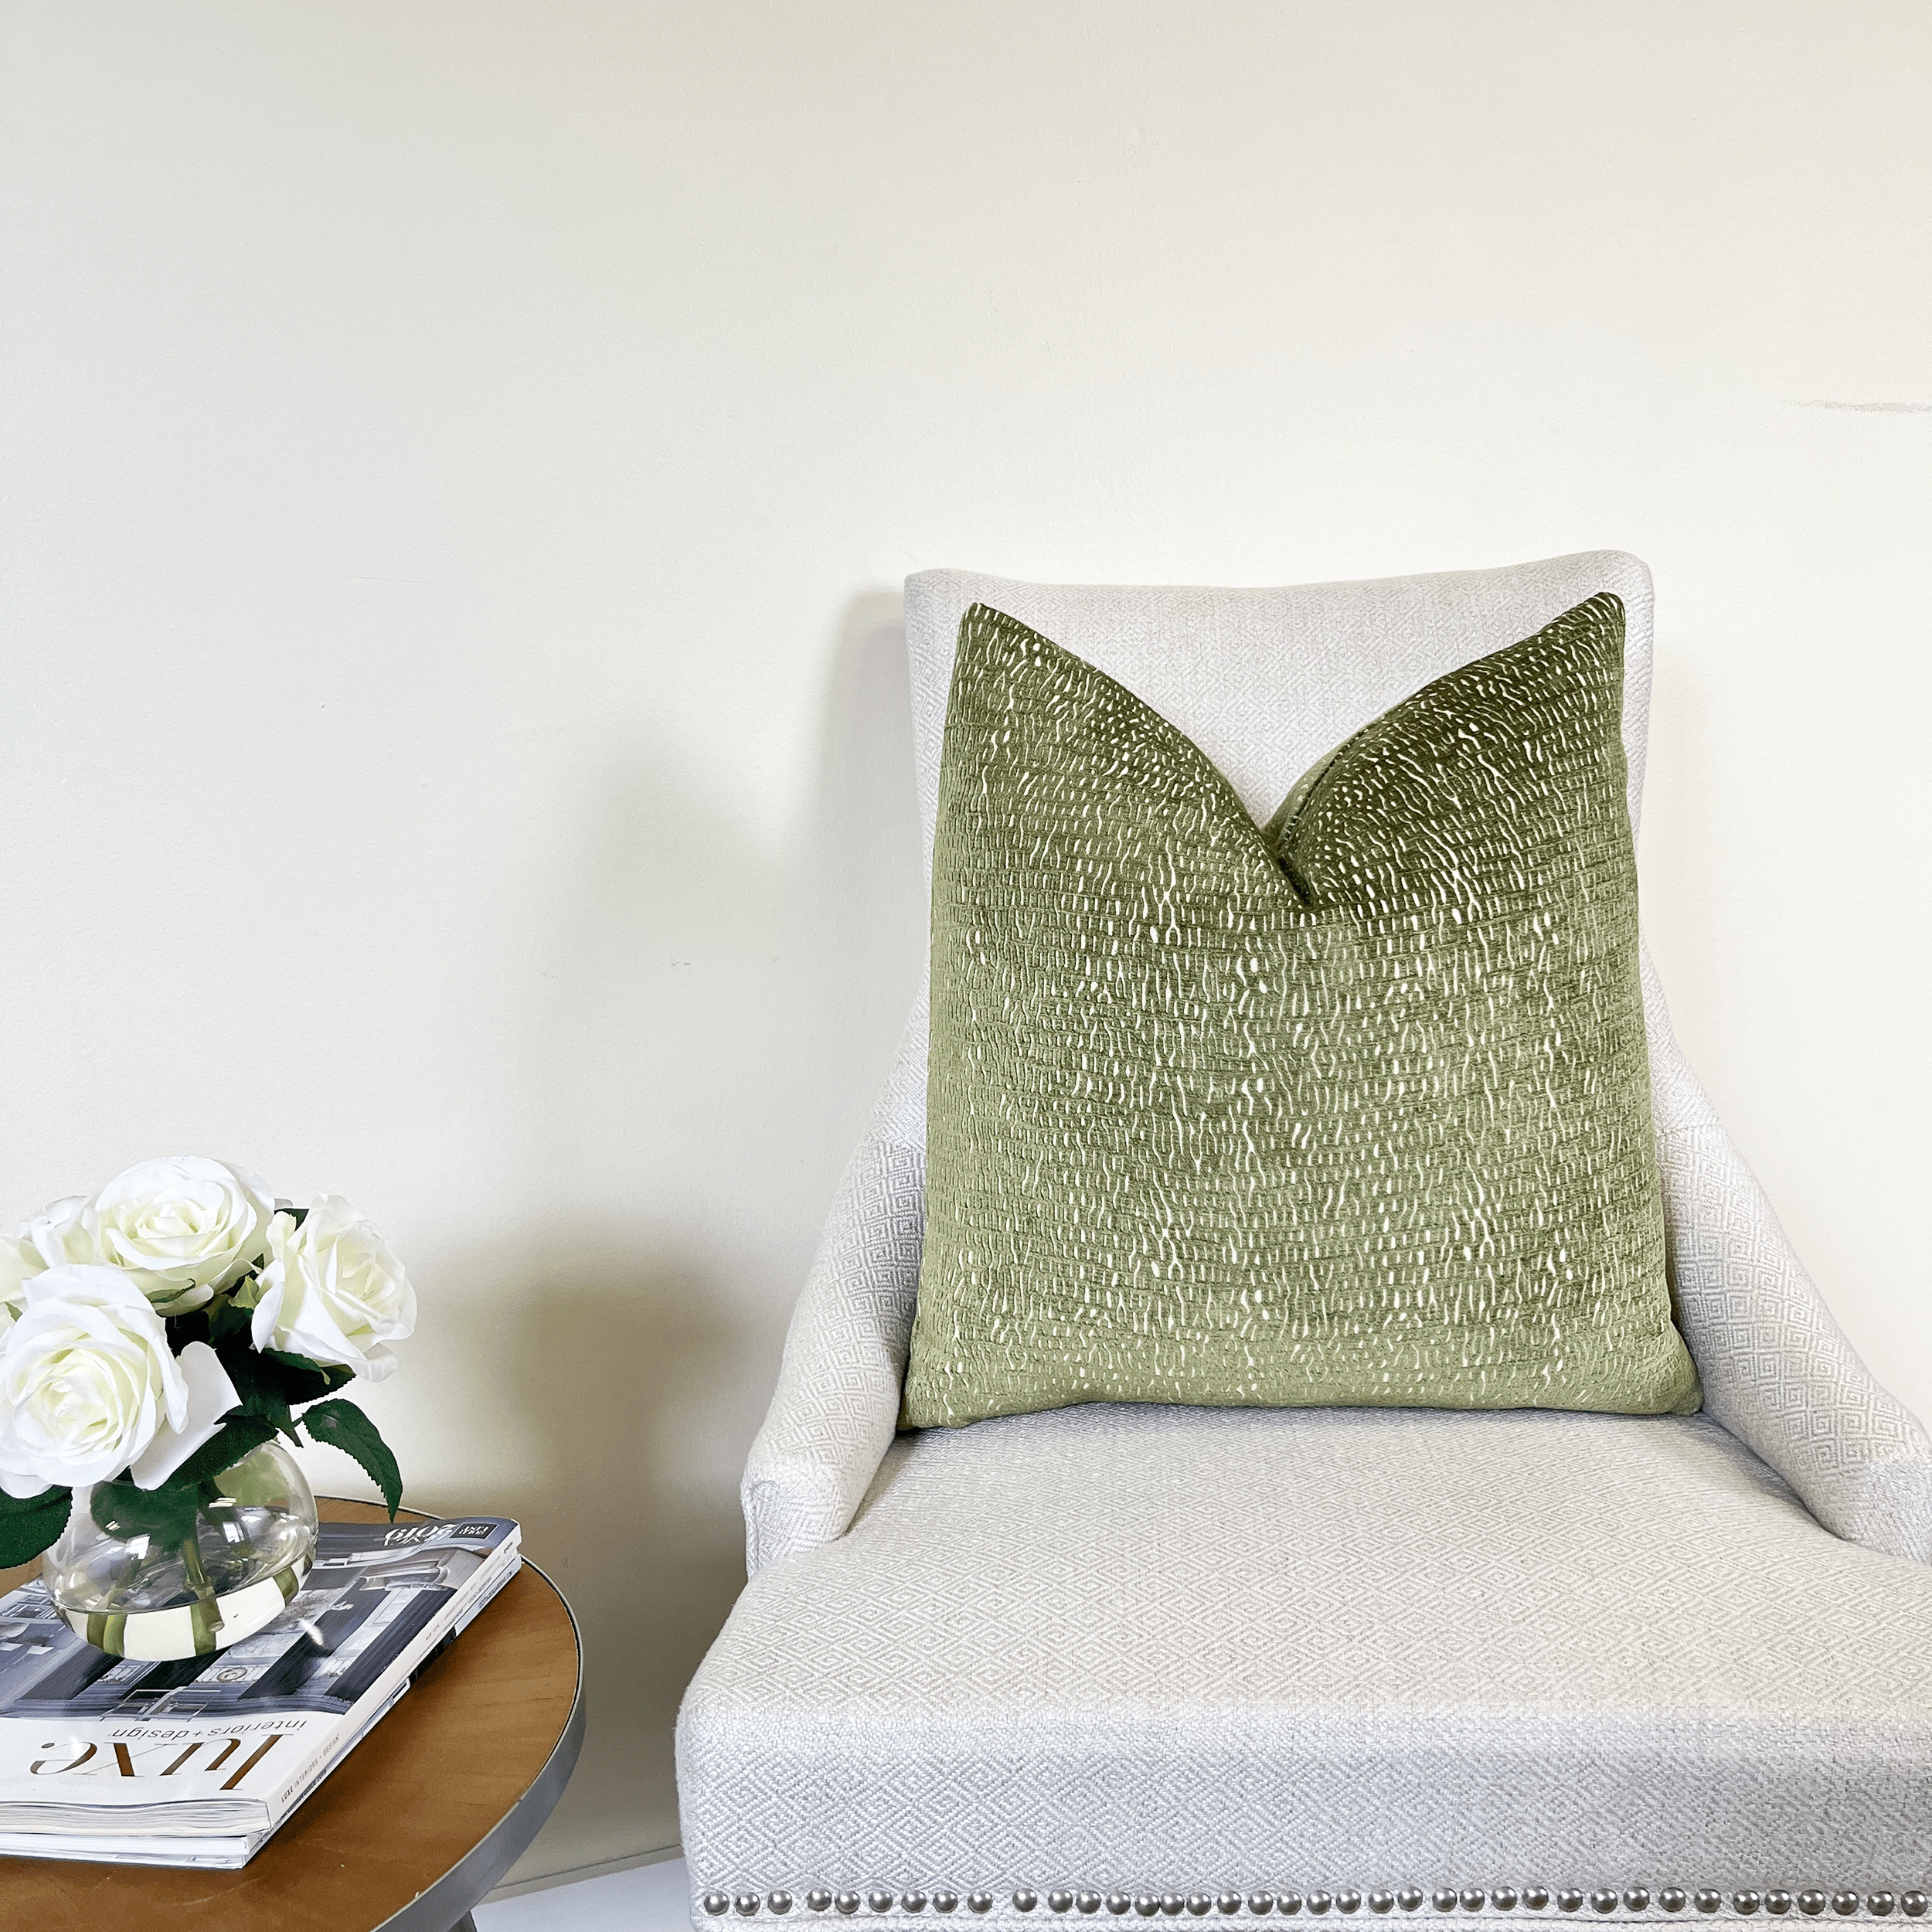 https://smithyhomecouture.com/wp-content/uploads/2022/08/Hunter-Green-cream-Chenille-chair.png